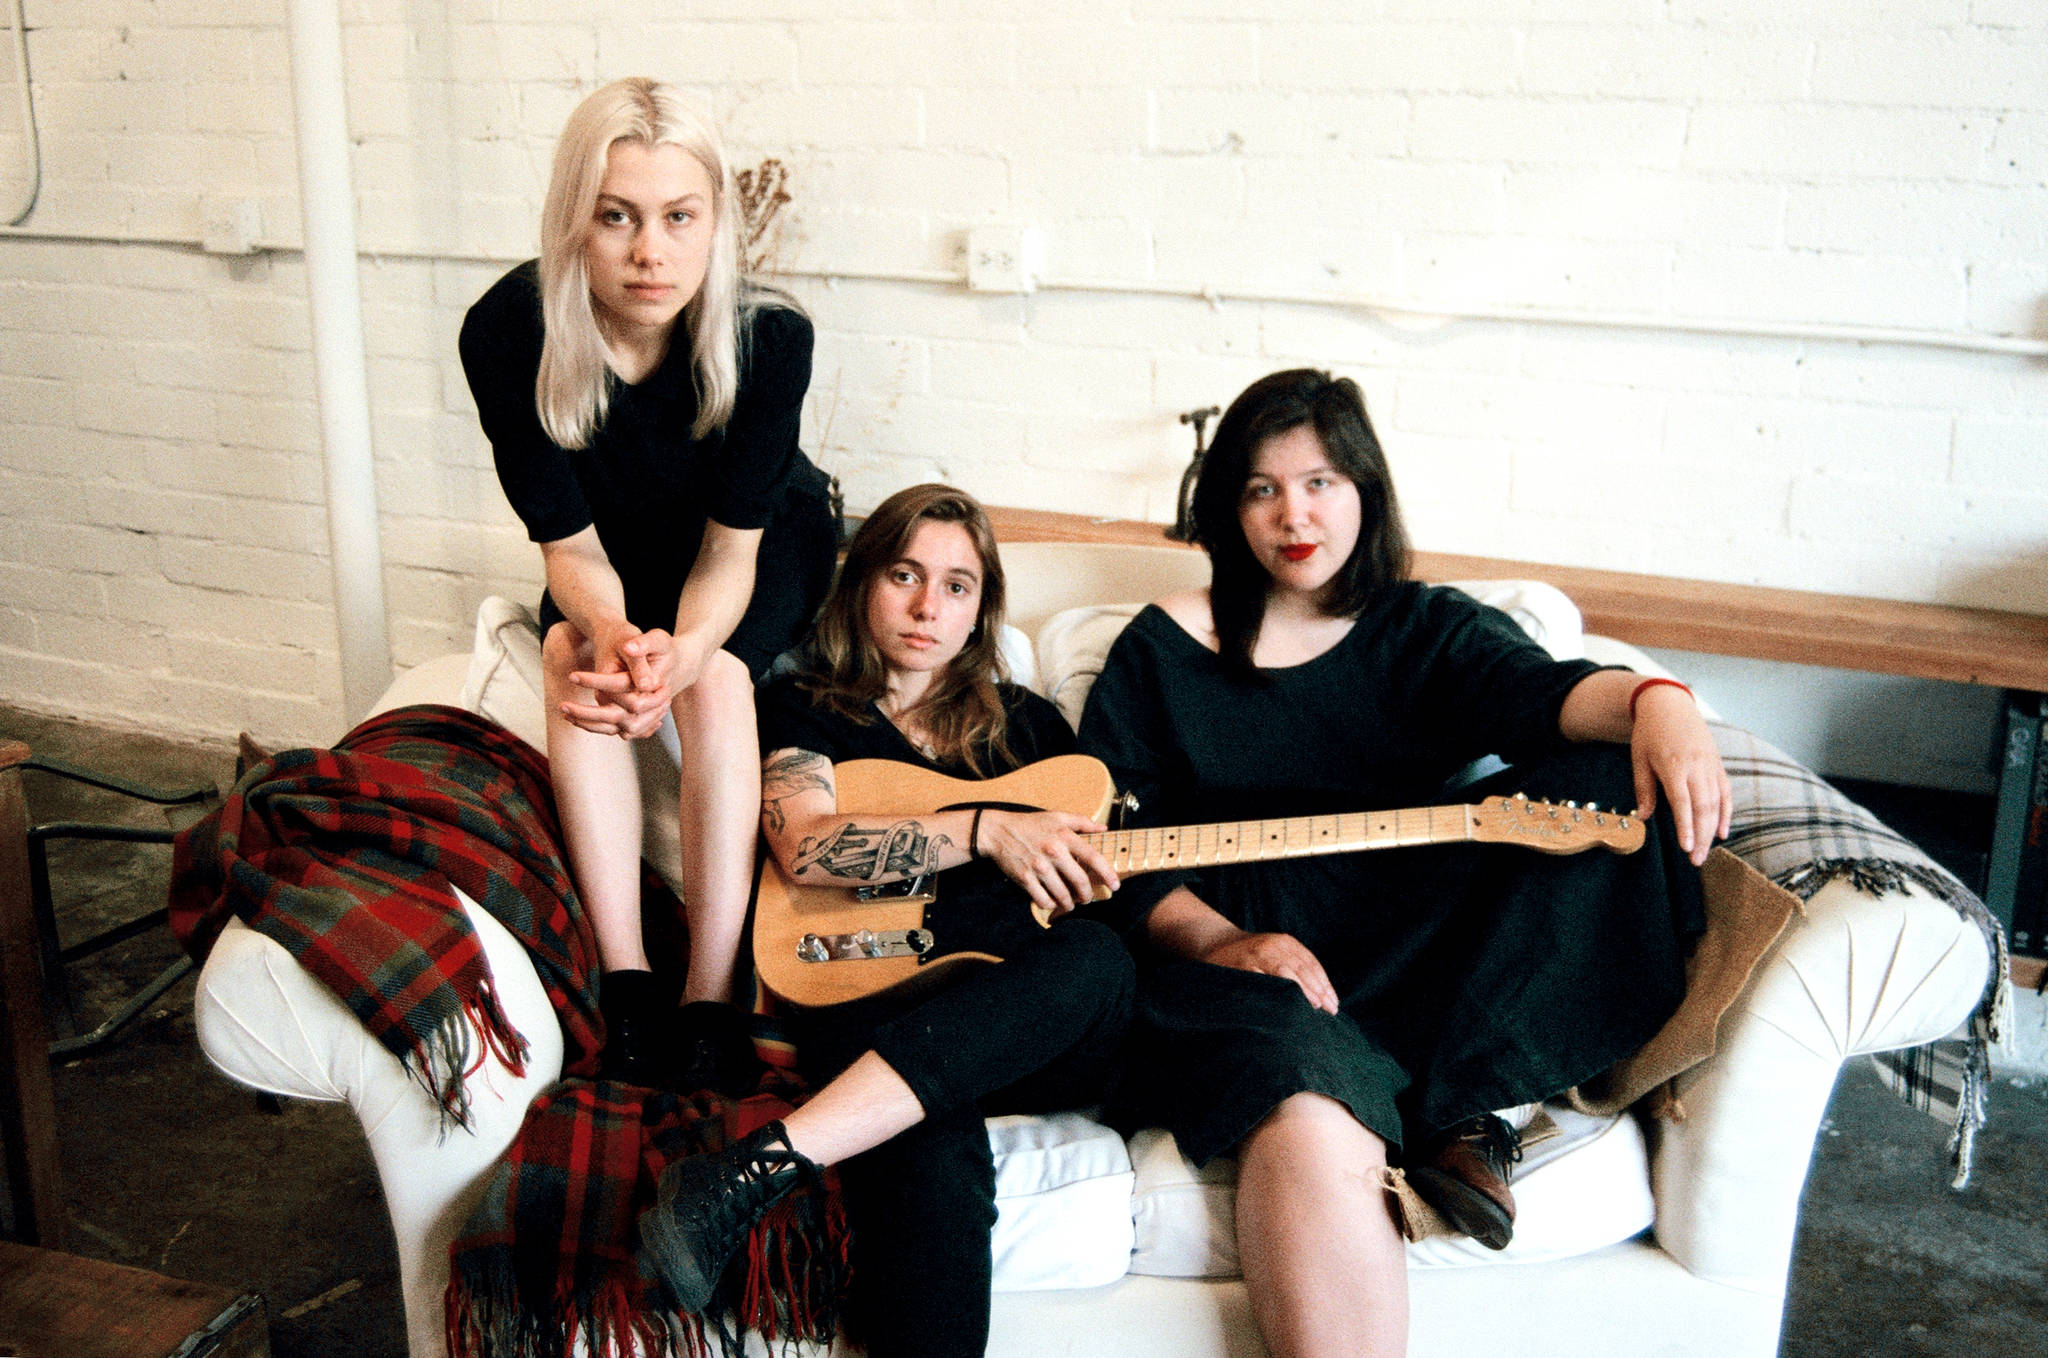 The boys are back in town: Phoebe Bridgers, Julien Baker, and Lucy Dacus combine forces to form Boygenius. Photo by Lera Pentelute